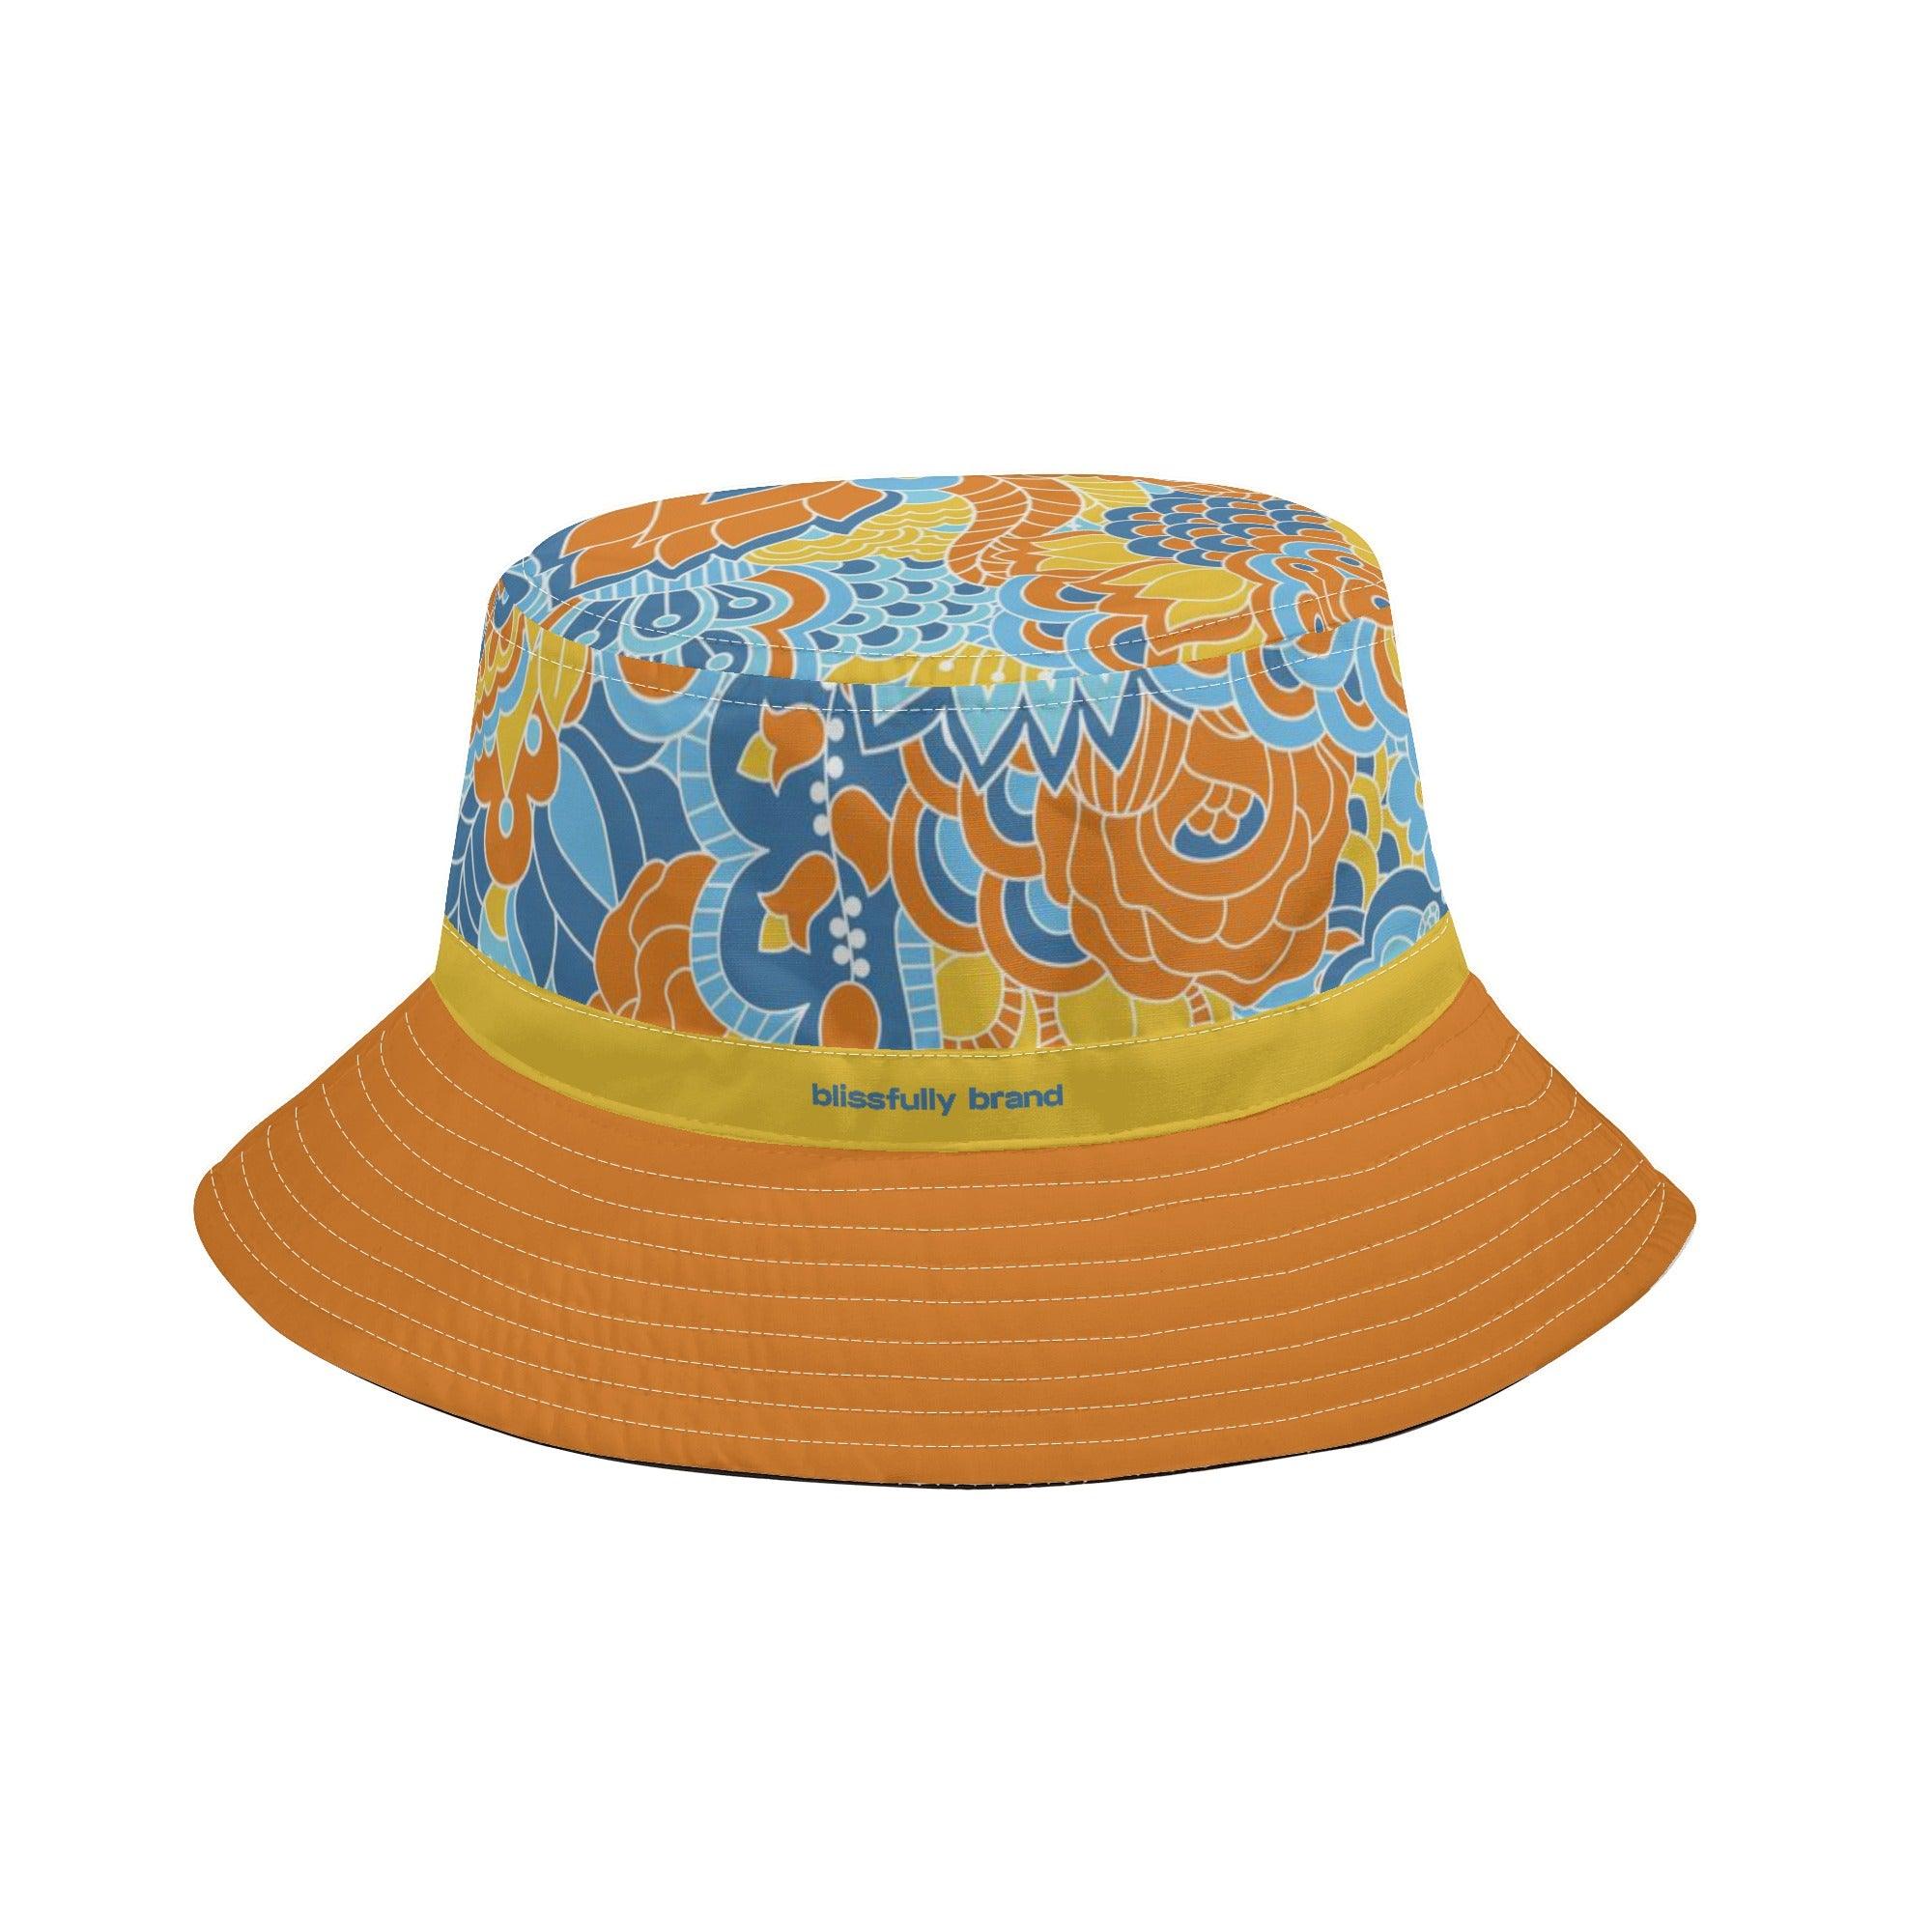 Pinsa Psychedelic Paisley Floral Bucket Hat with Adjustable String Retro Funky Bold Vibrant Pattern Blue Orange Yellow Blissfully Brand Summer Sun Cap